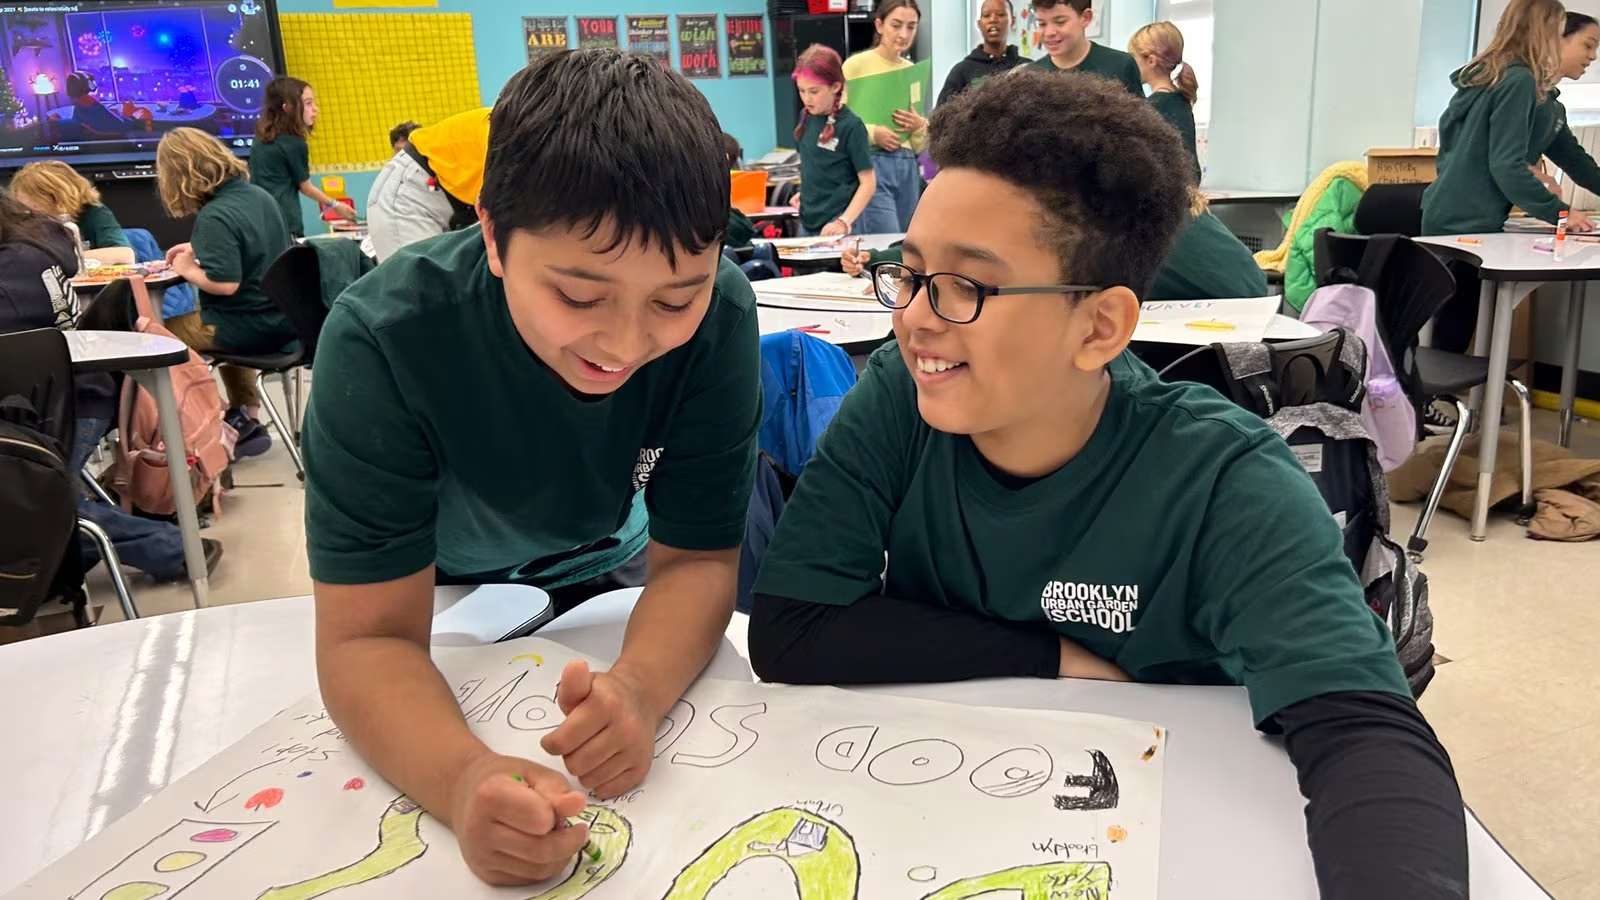 Sustainability, arts, math: ‘Themed’ middle schools are spreading, but do they help students?